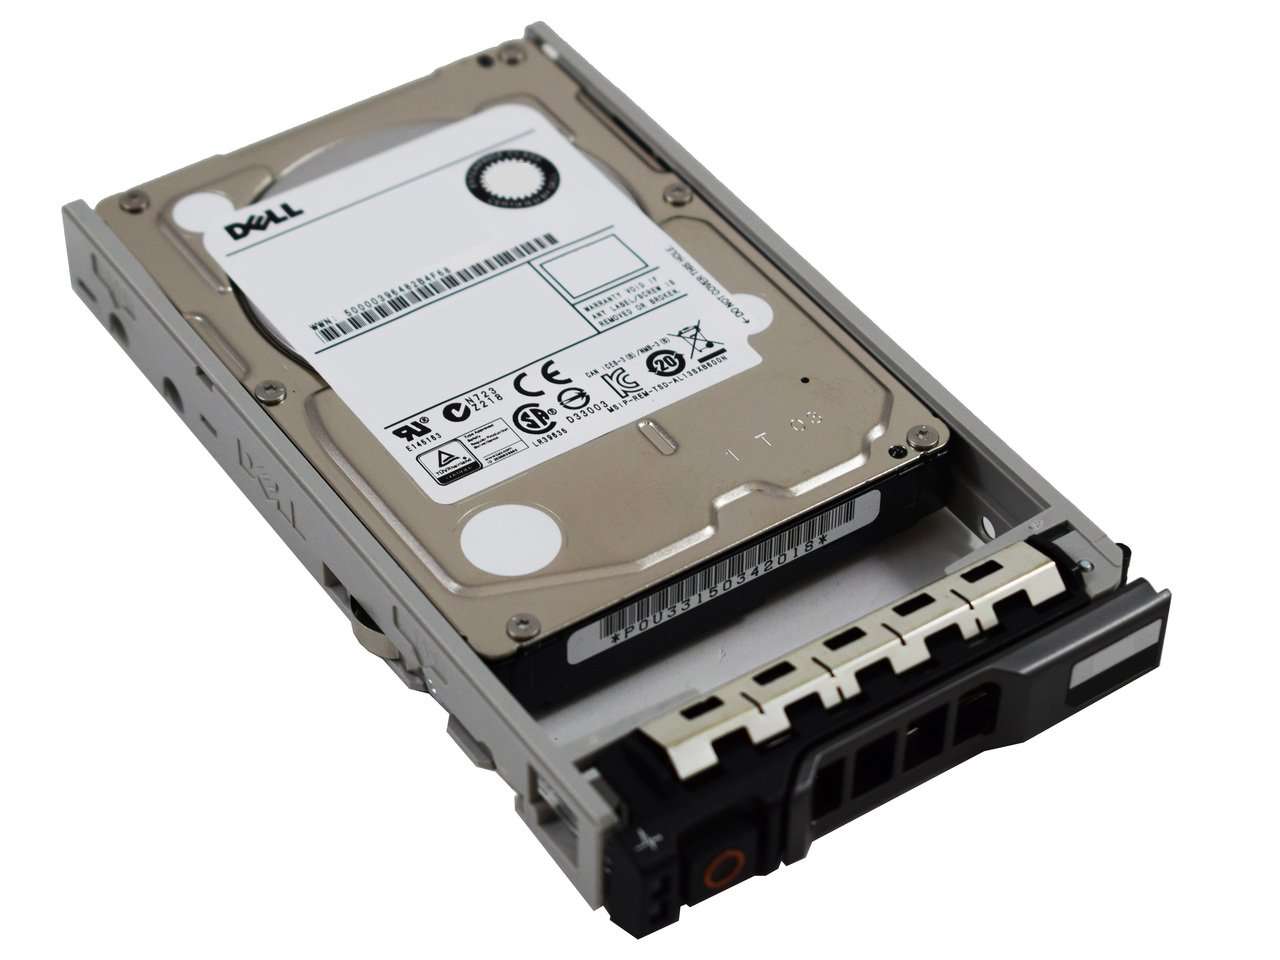 Dell G13 400-AMLD 1.2TB 10K RPM SAS 12Gb/s 512n 2.5" SED Manufacturer Recertified HDD